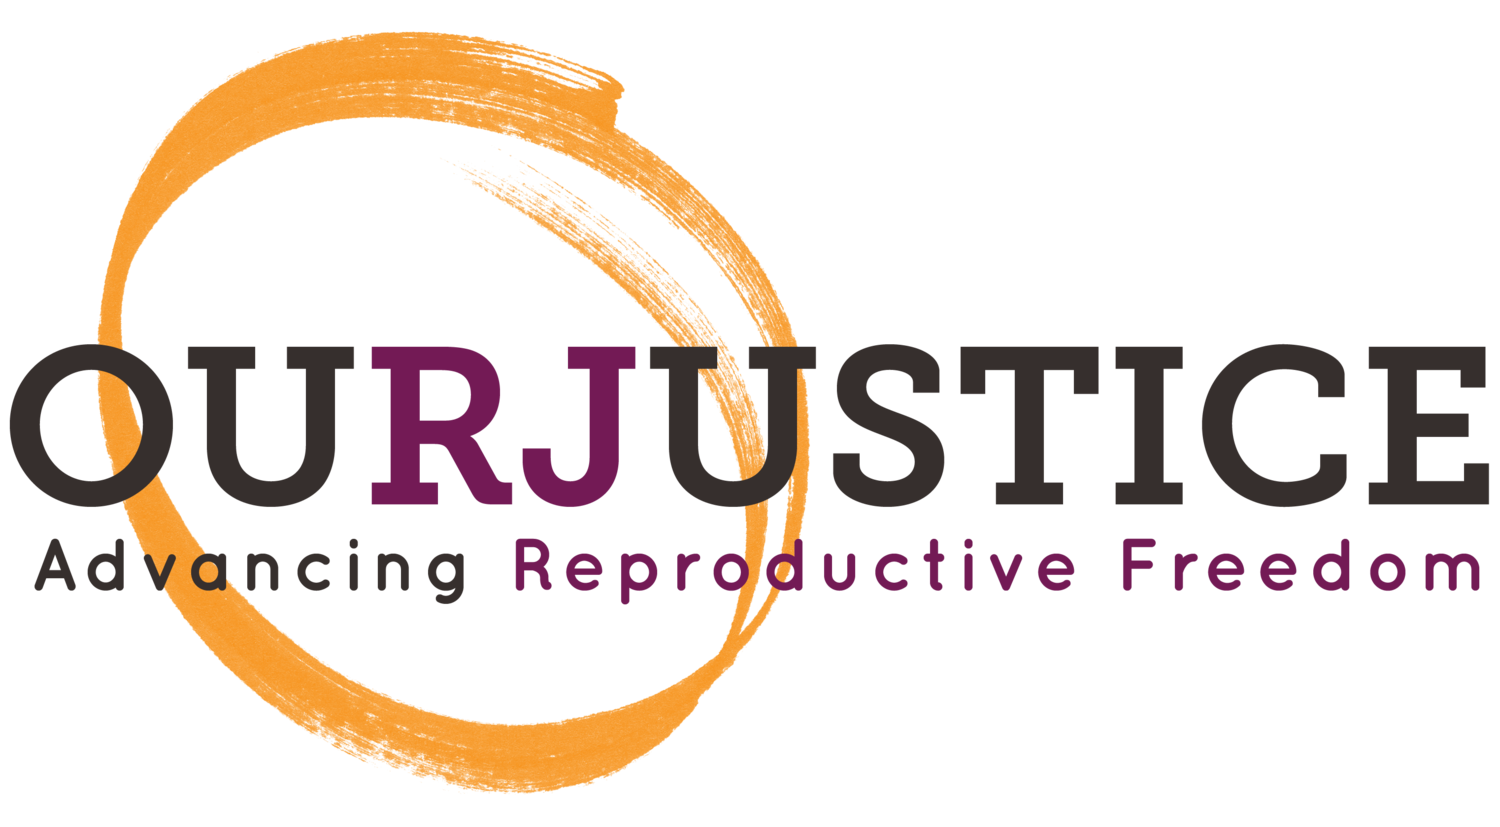 Our Justice: Advancing Reproductive Freedom - MN